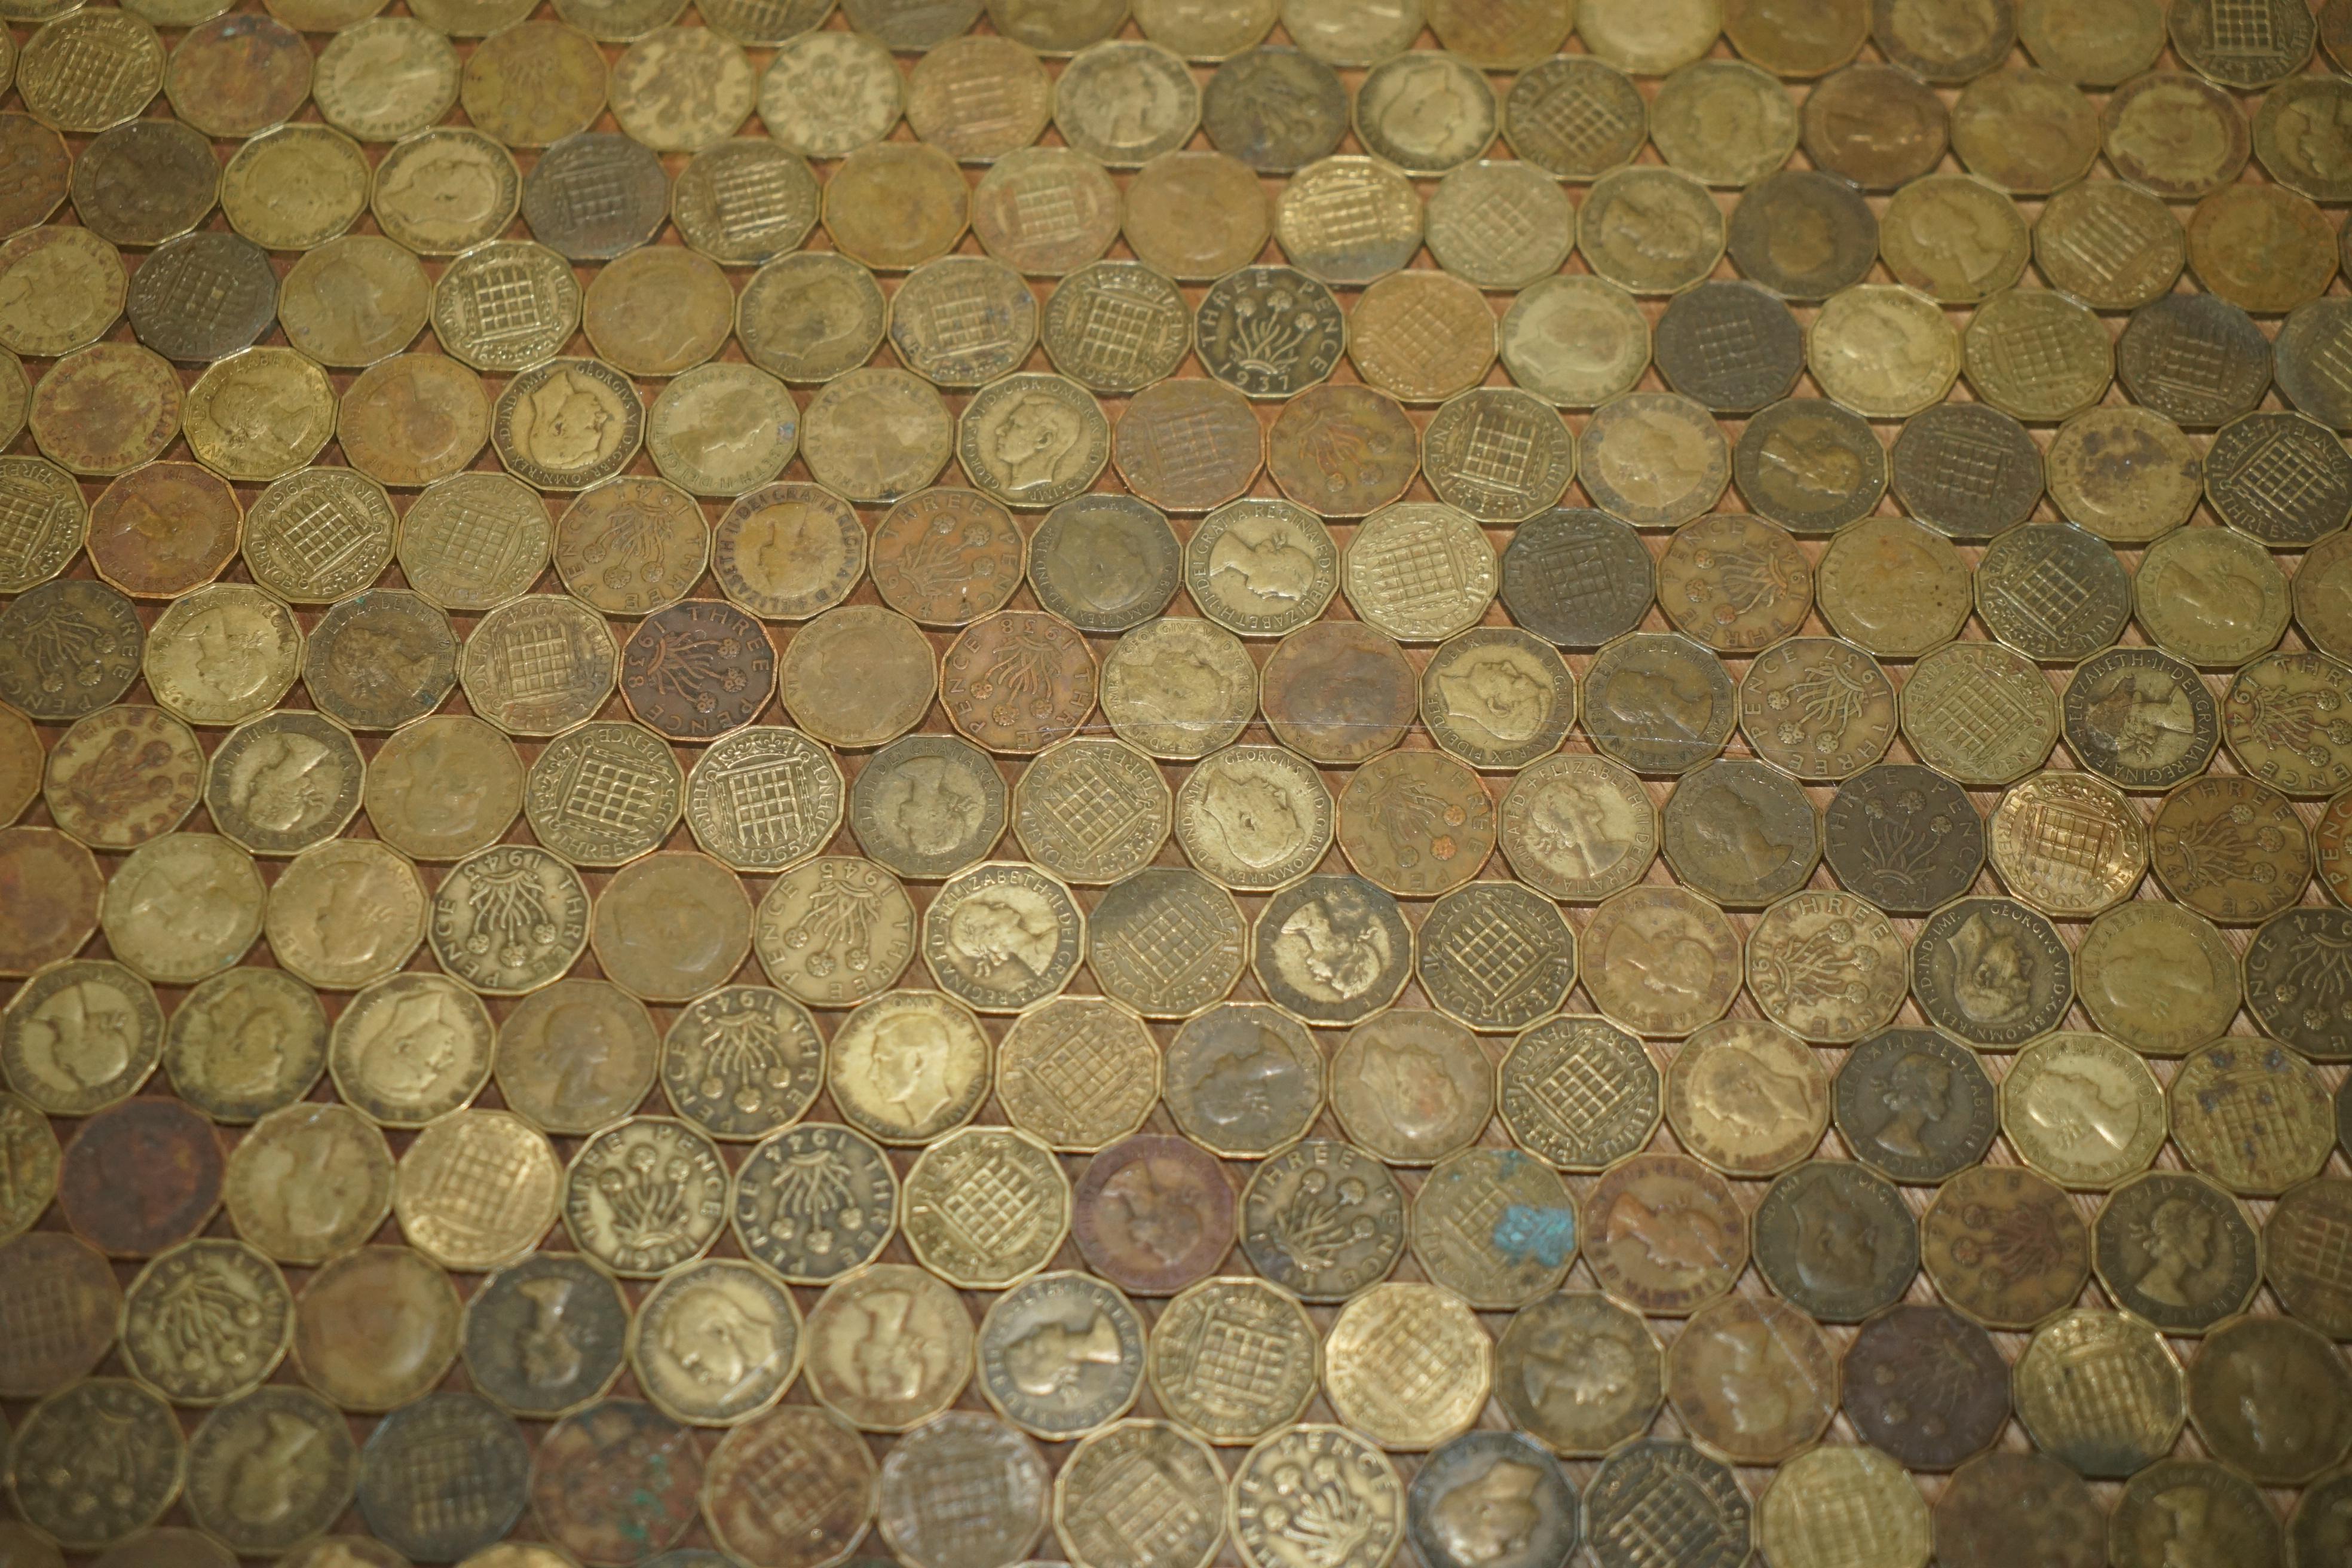 ANTIQUE CIRCA 1920 COFFEE TABLE COVERS IN ENGLISH THREE PENCE COINS FROM 1940's For Sale 3